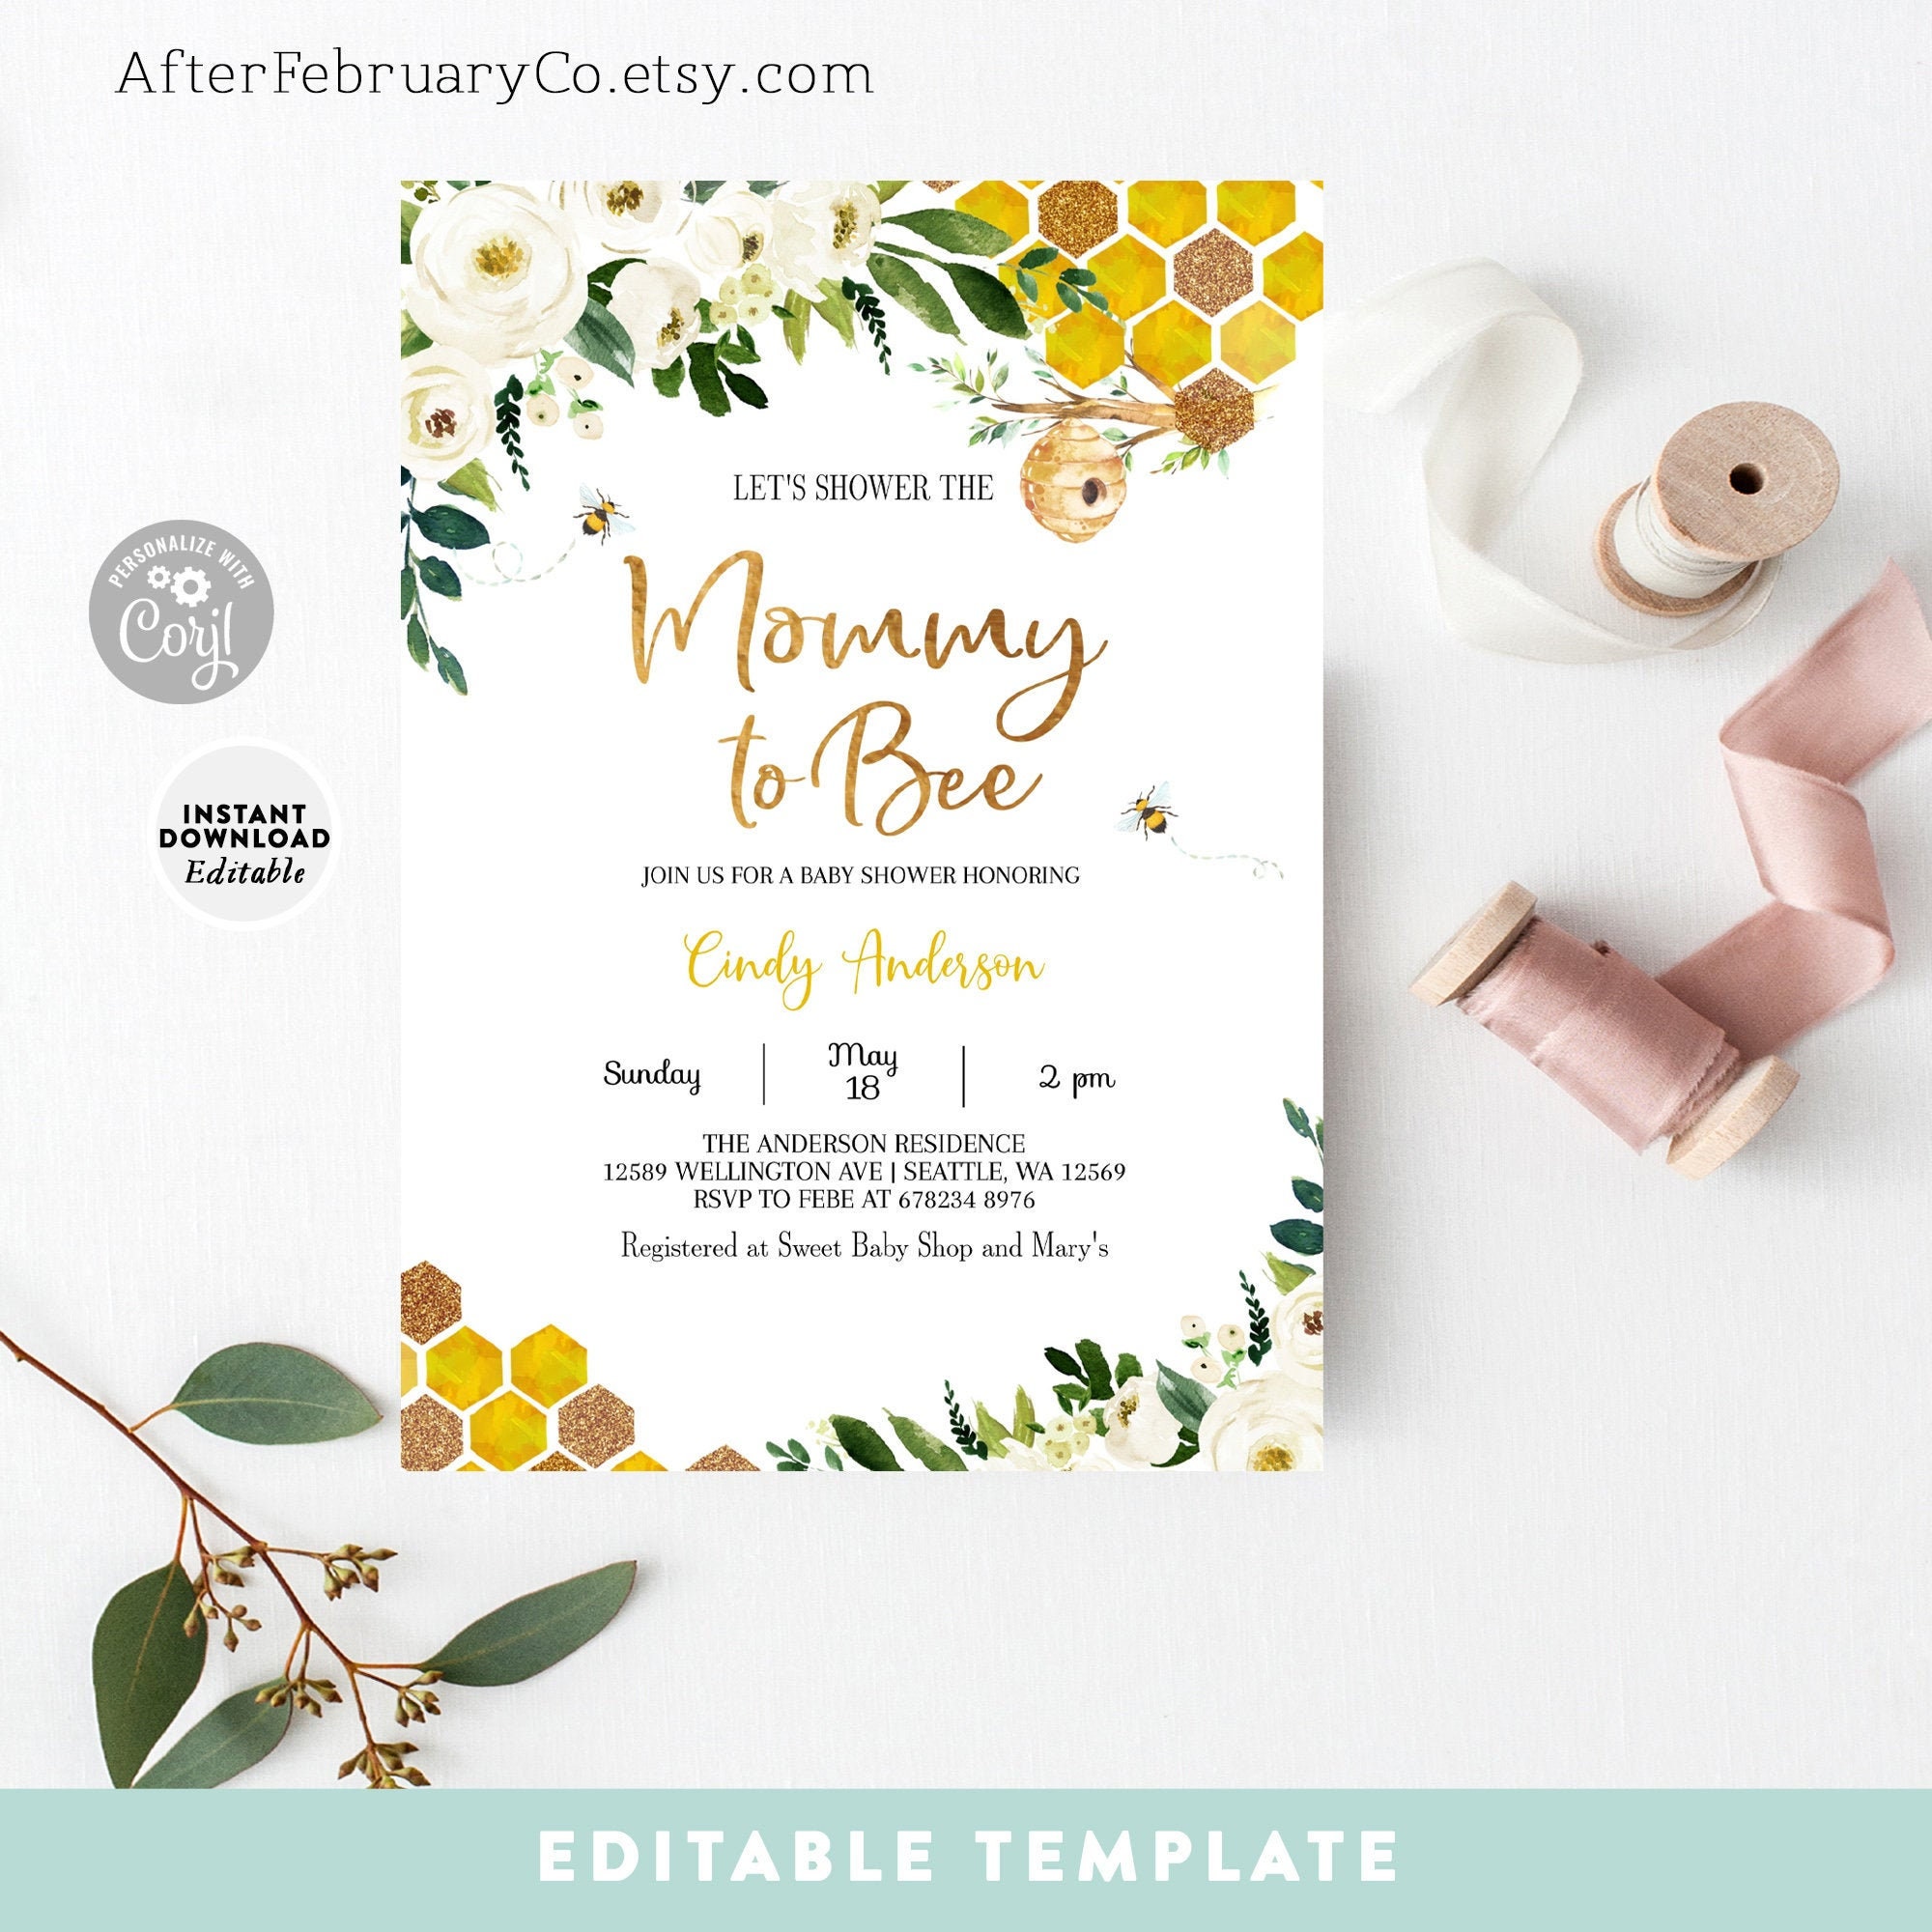 Editable Mommy to Bee Baby Shower Invitation Gender Neutral Mommy to Bee Baby Shower Invite Printable Template Instant Download 845 2